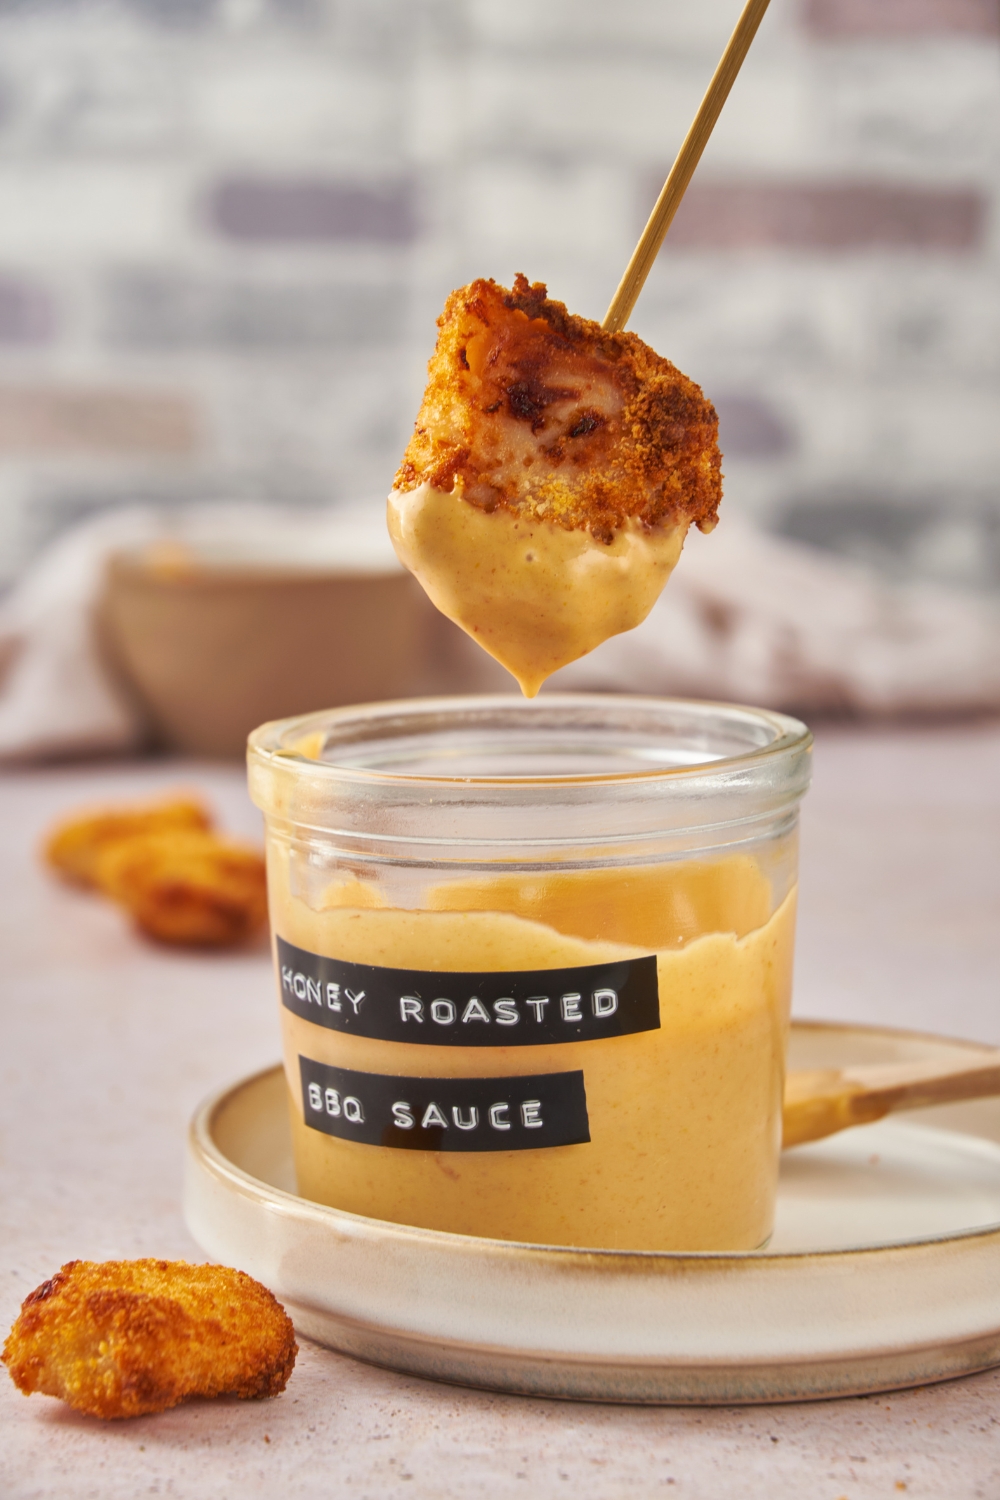 A nugget held by a toothpick being dipped in a jar labeled "honey roasted bbq sauce."